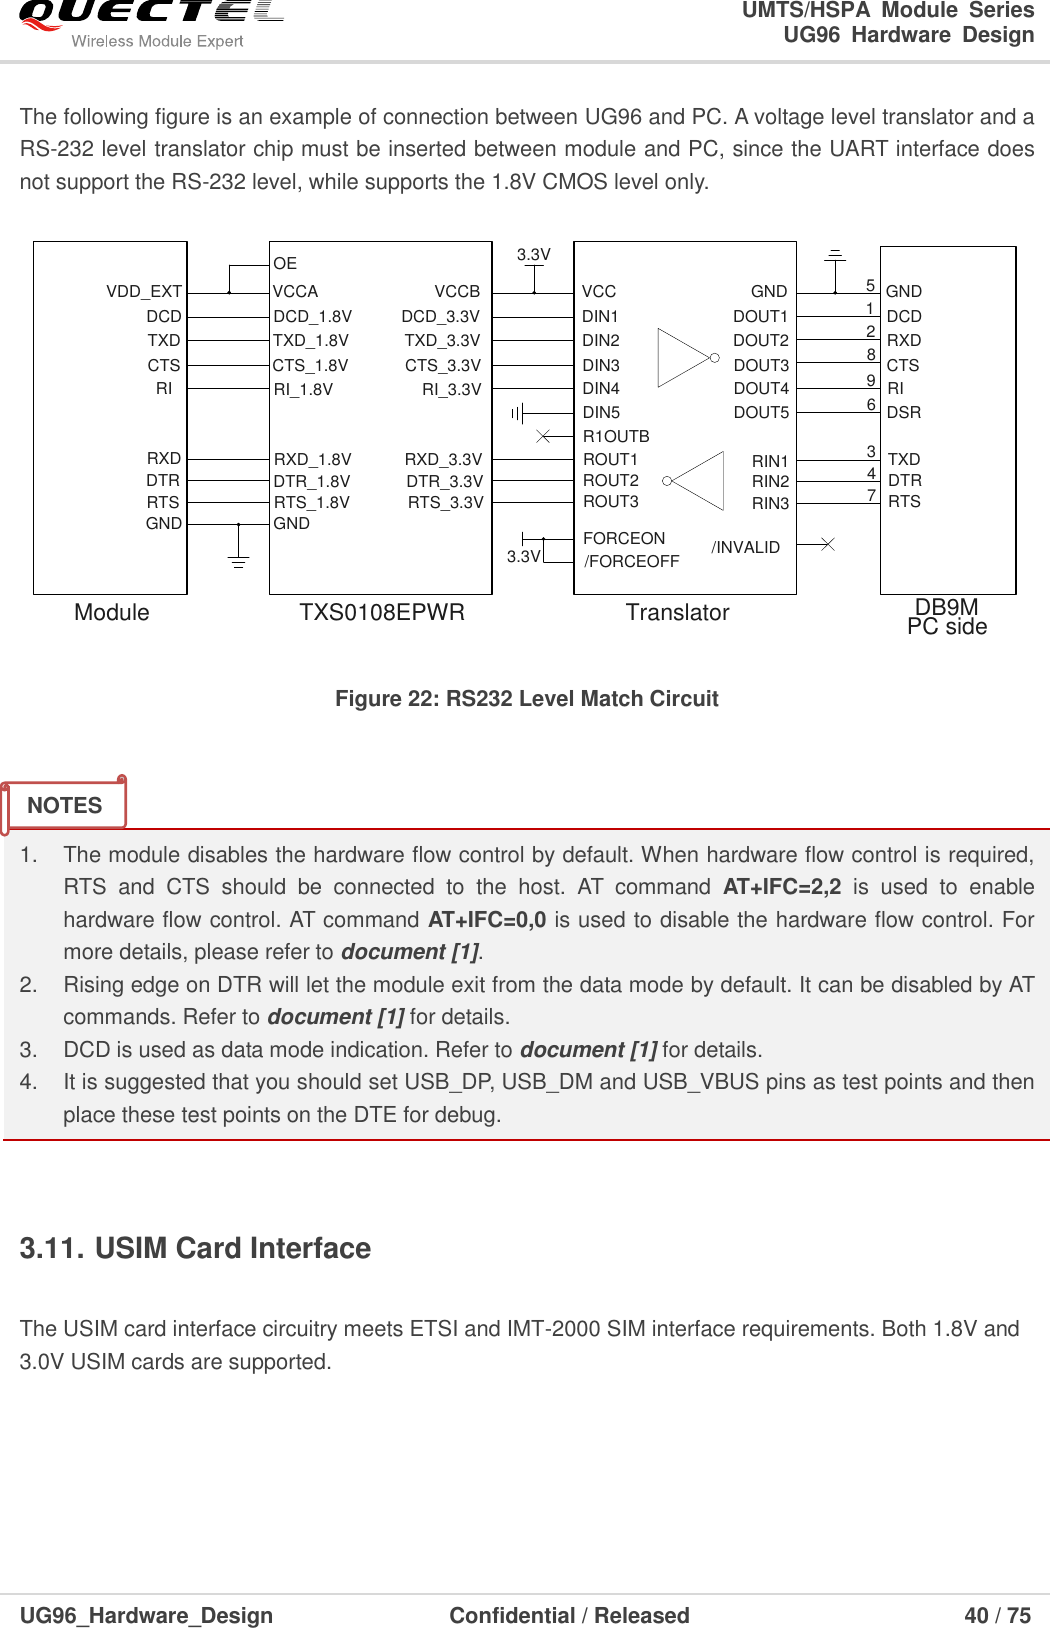                                                                        UMTS/HSPA  Module  Series                                                                 UG96  Hardware  Design  UG96_Hardware_Design                  Confidential / Released                             40 / 75    The following figure is an example of connection between UG96 and PC. A voltage level translator and a RS-232 level translator chip must be inserted between module and PC, since the UART interface does not support the RS-232 level, while supports the 1.8V CMOS level only.    TXS0108EPWRDCD_3.3VRTS_3.3VDTR_3.3VRXD_3.3VRI_3.3VCTS_3.3VTXD_3.3VDCDRTSDTRRXDRICTSTXDDCD_1.8VRTS_1.8VDTR_1.8VRXD_1.8VRI_1.8VCTS_1.8VTXD_1.8VVCCAModuleGND GNDVDD_EXT VCCB3.3VDIN1ROUT3ROUT2ROUT1DIN4DIN3DIN2DIN5R1OUTBFORCEON/FORCEOFF /INVALID3.3VDOUT1DOUT2DOUT3DOUT4DOUT5RIN3RIN2RIN1VCC GNDOETranslator DB9MPC sideDCDRTSDTRTXDRICTSRXDDSRGND123456789 Figure 22: RS232 Level Match Circuit   1.  The module disables the hardware flow control by default. When hardware flow control is required, RTS  and  CTS  should  be  connected  to  the  host.  AT  command  AT+IFC=2,2  is  used  to  enable hardware flow control. AT command AT+IFC=0,0 is used to disable the hardware flow control. For more details, please refer to document [1]. 2.  Rising edge on DTR will let the module exit from the data mode by default. It can be disabled by AT commands. Refer to document [1] for details. 3.  DCD is used as data mode indication. Refer to document [1] for details. 4.  It is suggested that you should set USB_DP, USB_DM and USB_VBUS pins as test points and then place these test points on the DTE for debug.  3.11. USIM Card Interface  The USIM card interface circuitry meets ETSI and IMT-2000 SIM interface requirements. Both 1.8V and 3.0V USIM cards are supported.    NOTES 